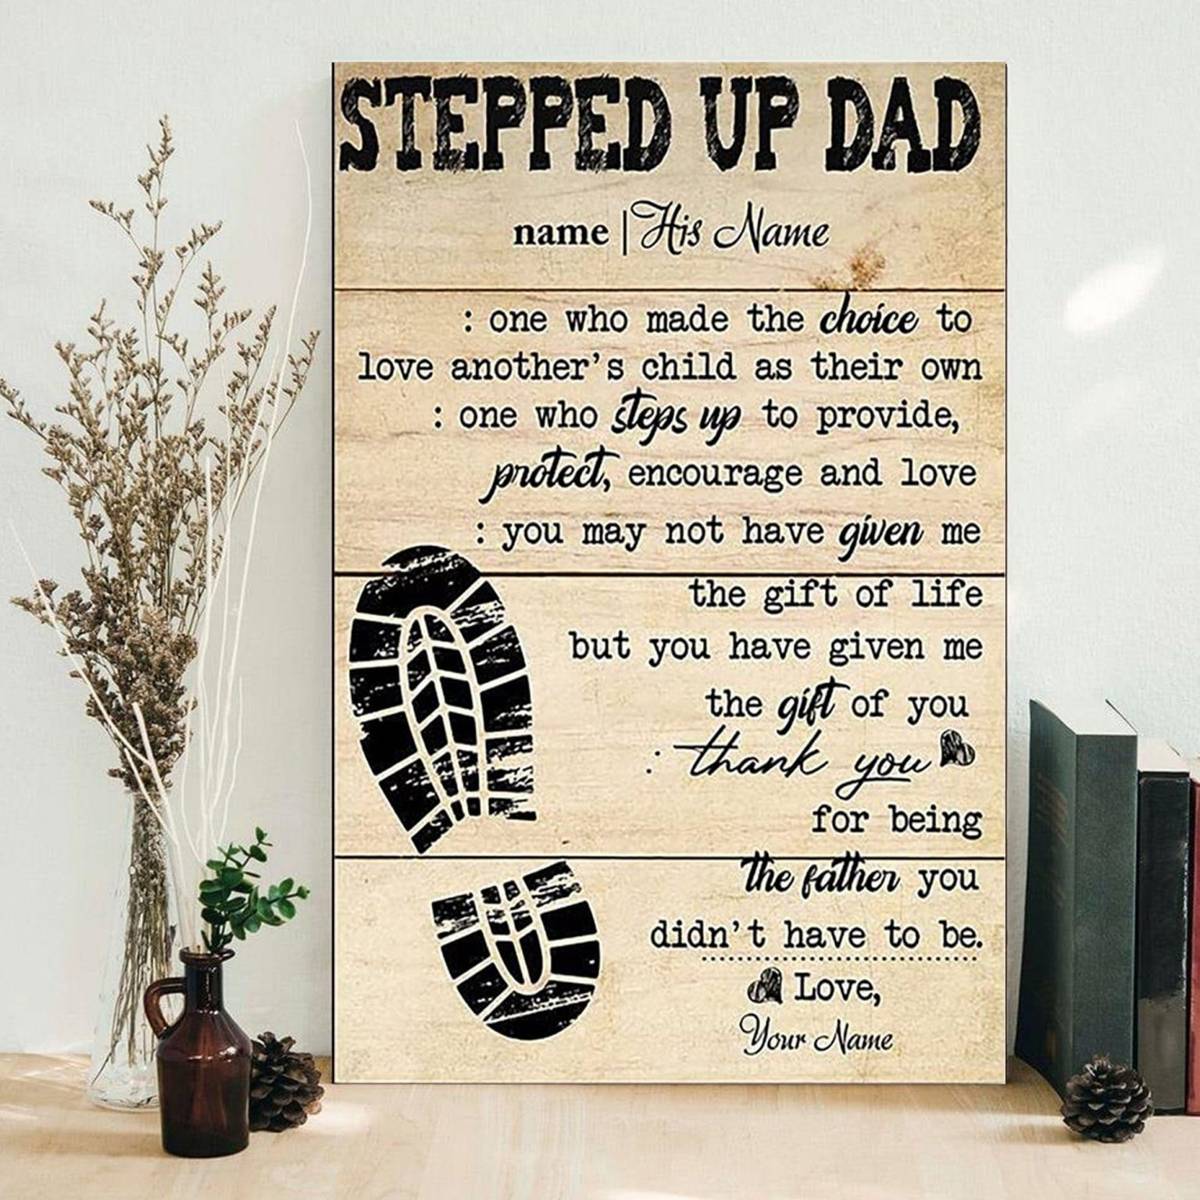 Personalized Stepped Up Dad Poster Father #39 S Day Poster Stepdad